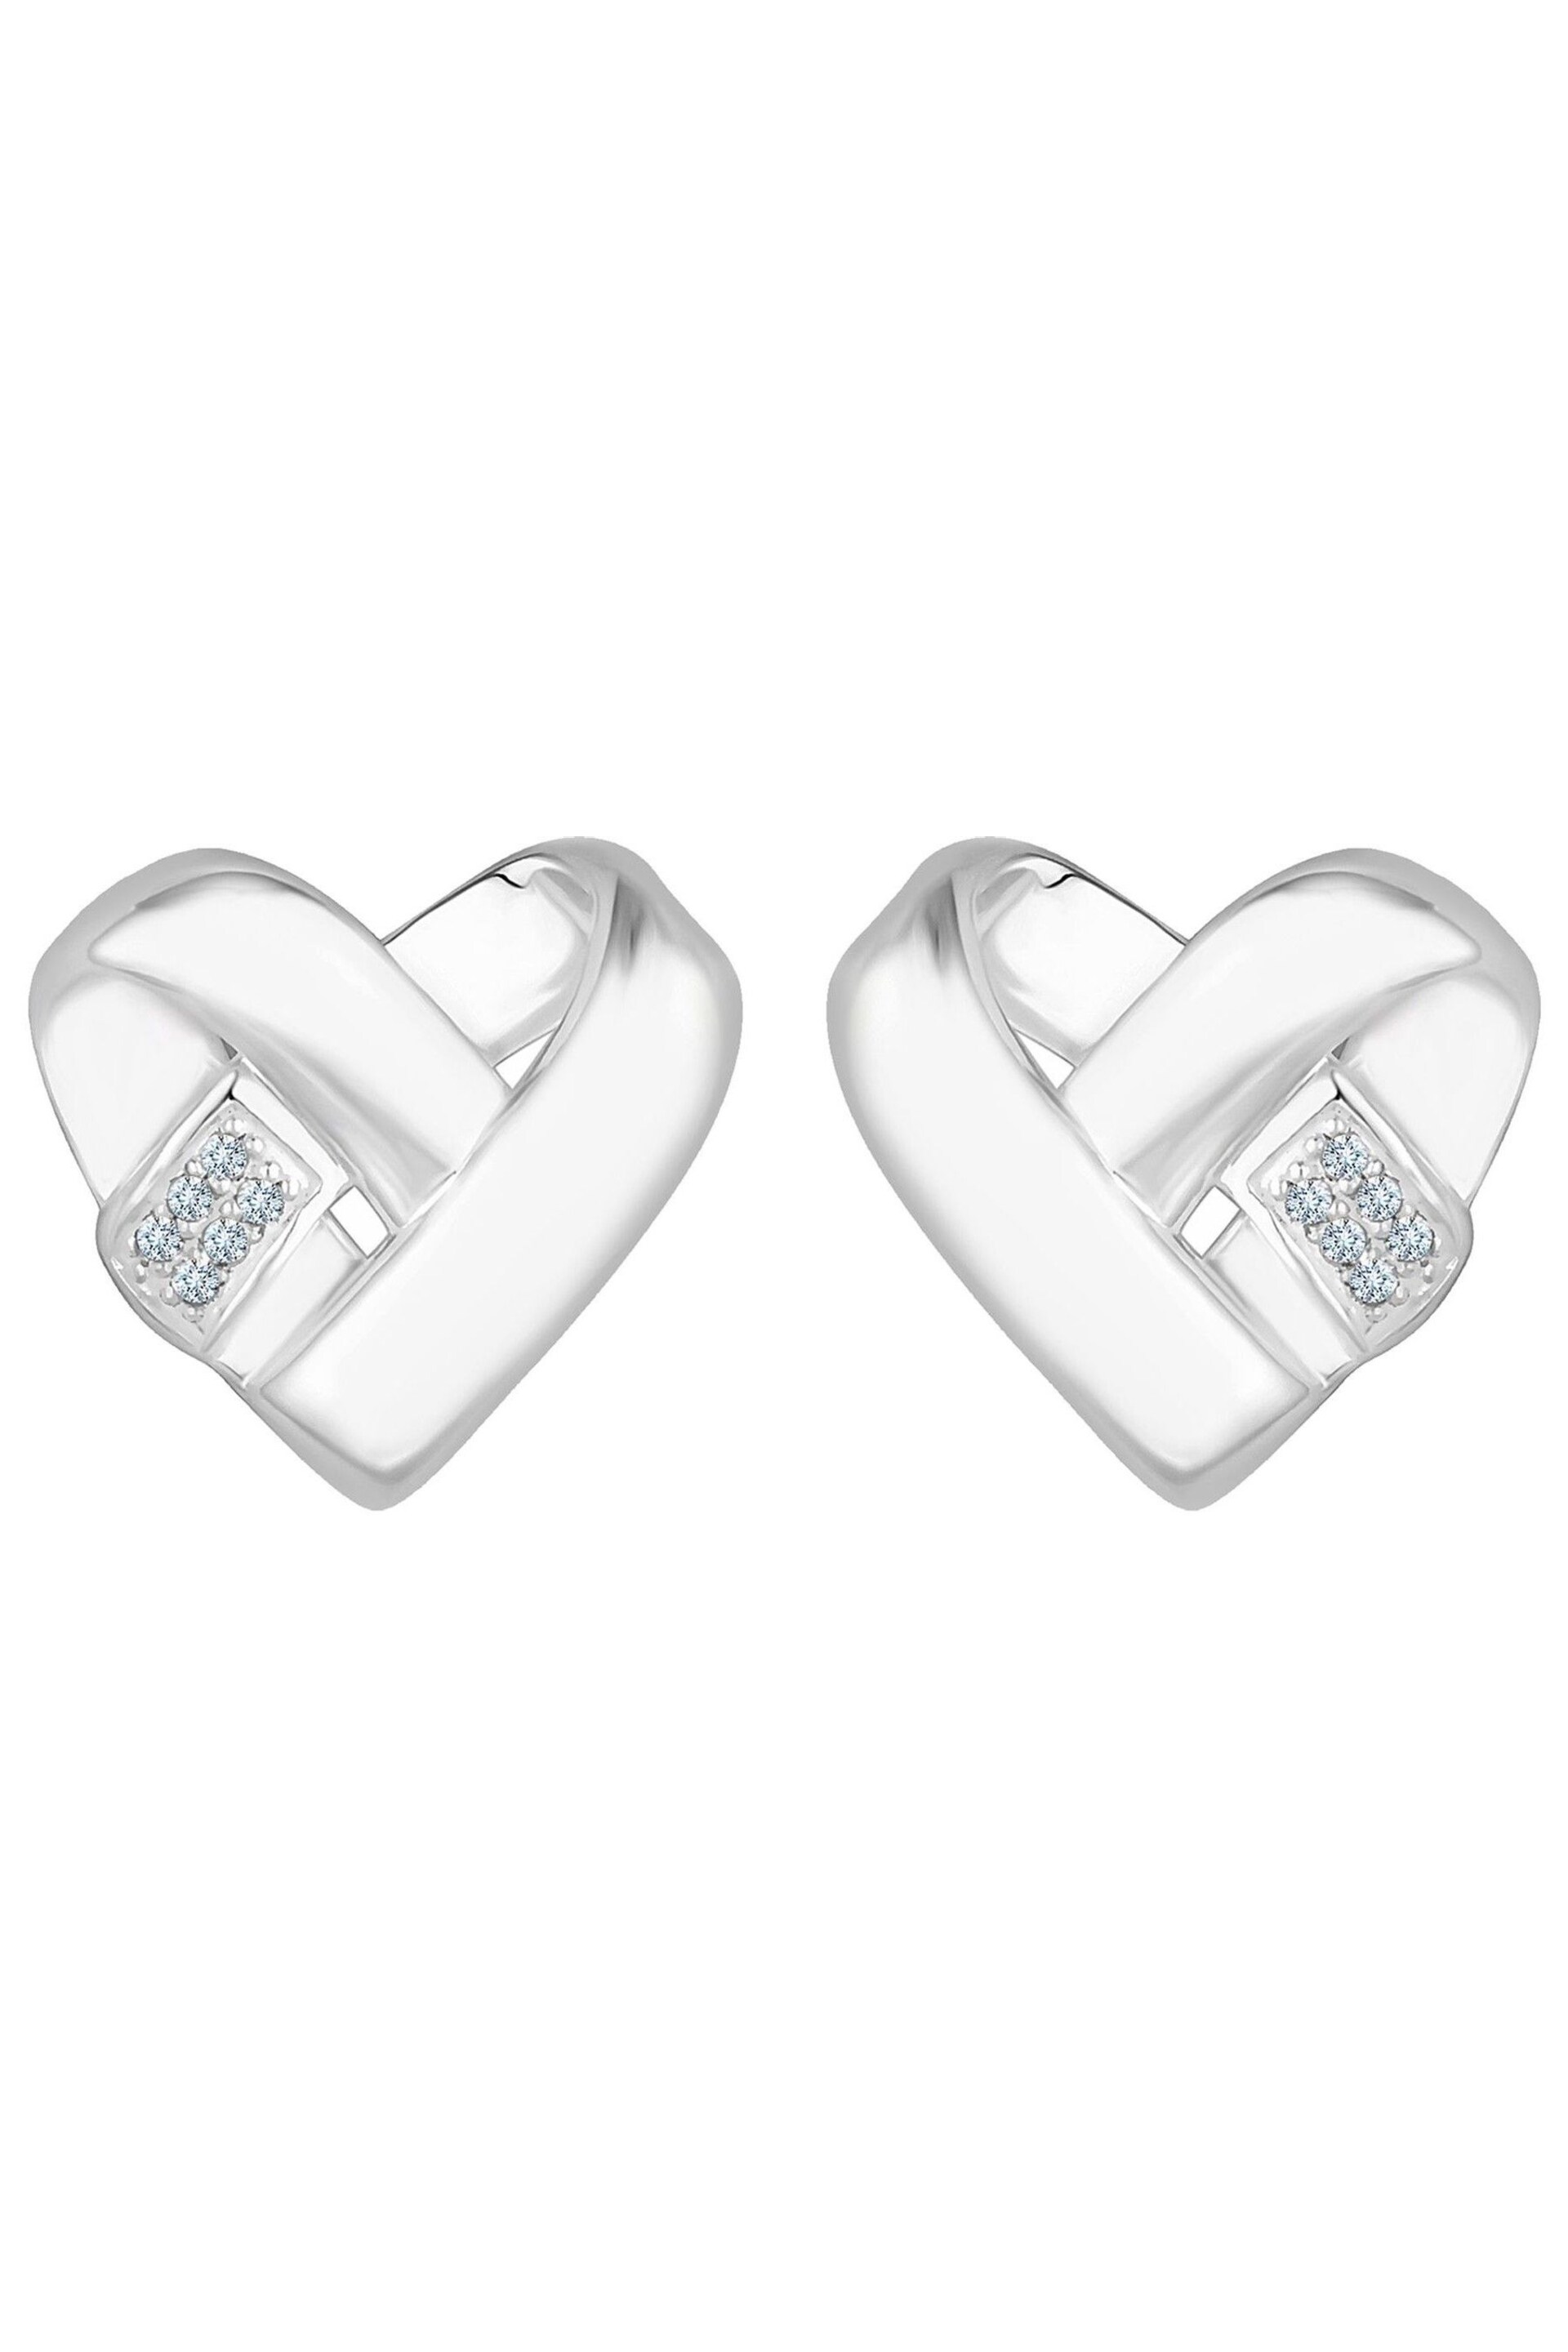 Simply Silver Sterling Silver 925 Knotted Heart Earrings - Image 2 of 3